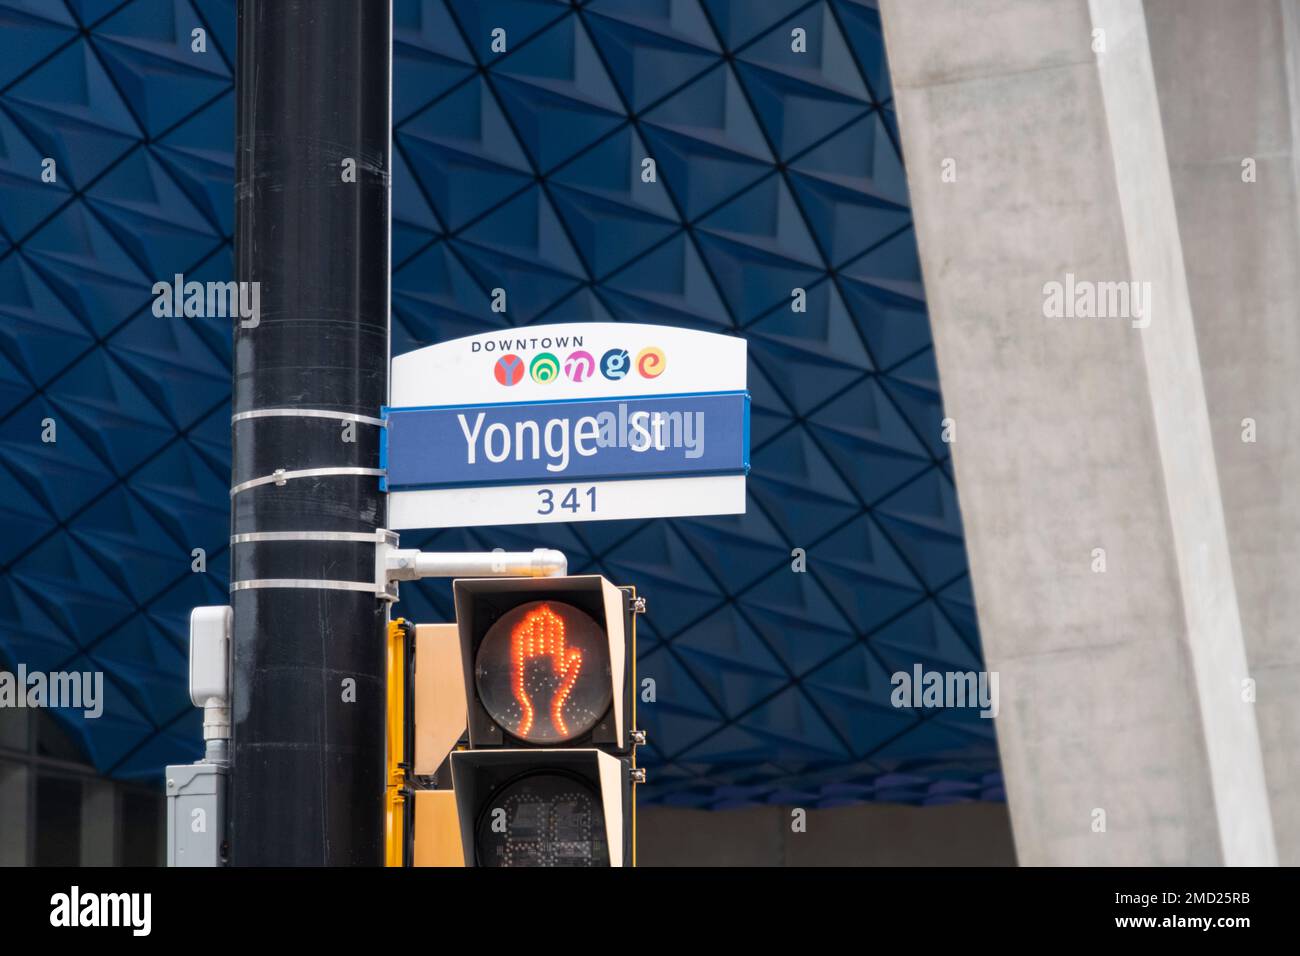 Street Sign for Downtown Yonge Street, Yonge Street Toronto, Ontario, Canada Yonge Street is Toronto's most famous street, and it was once the longest Stock Photo